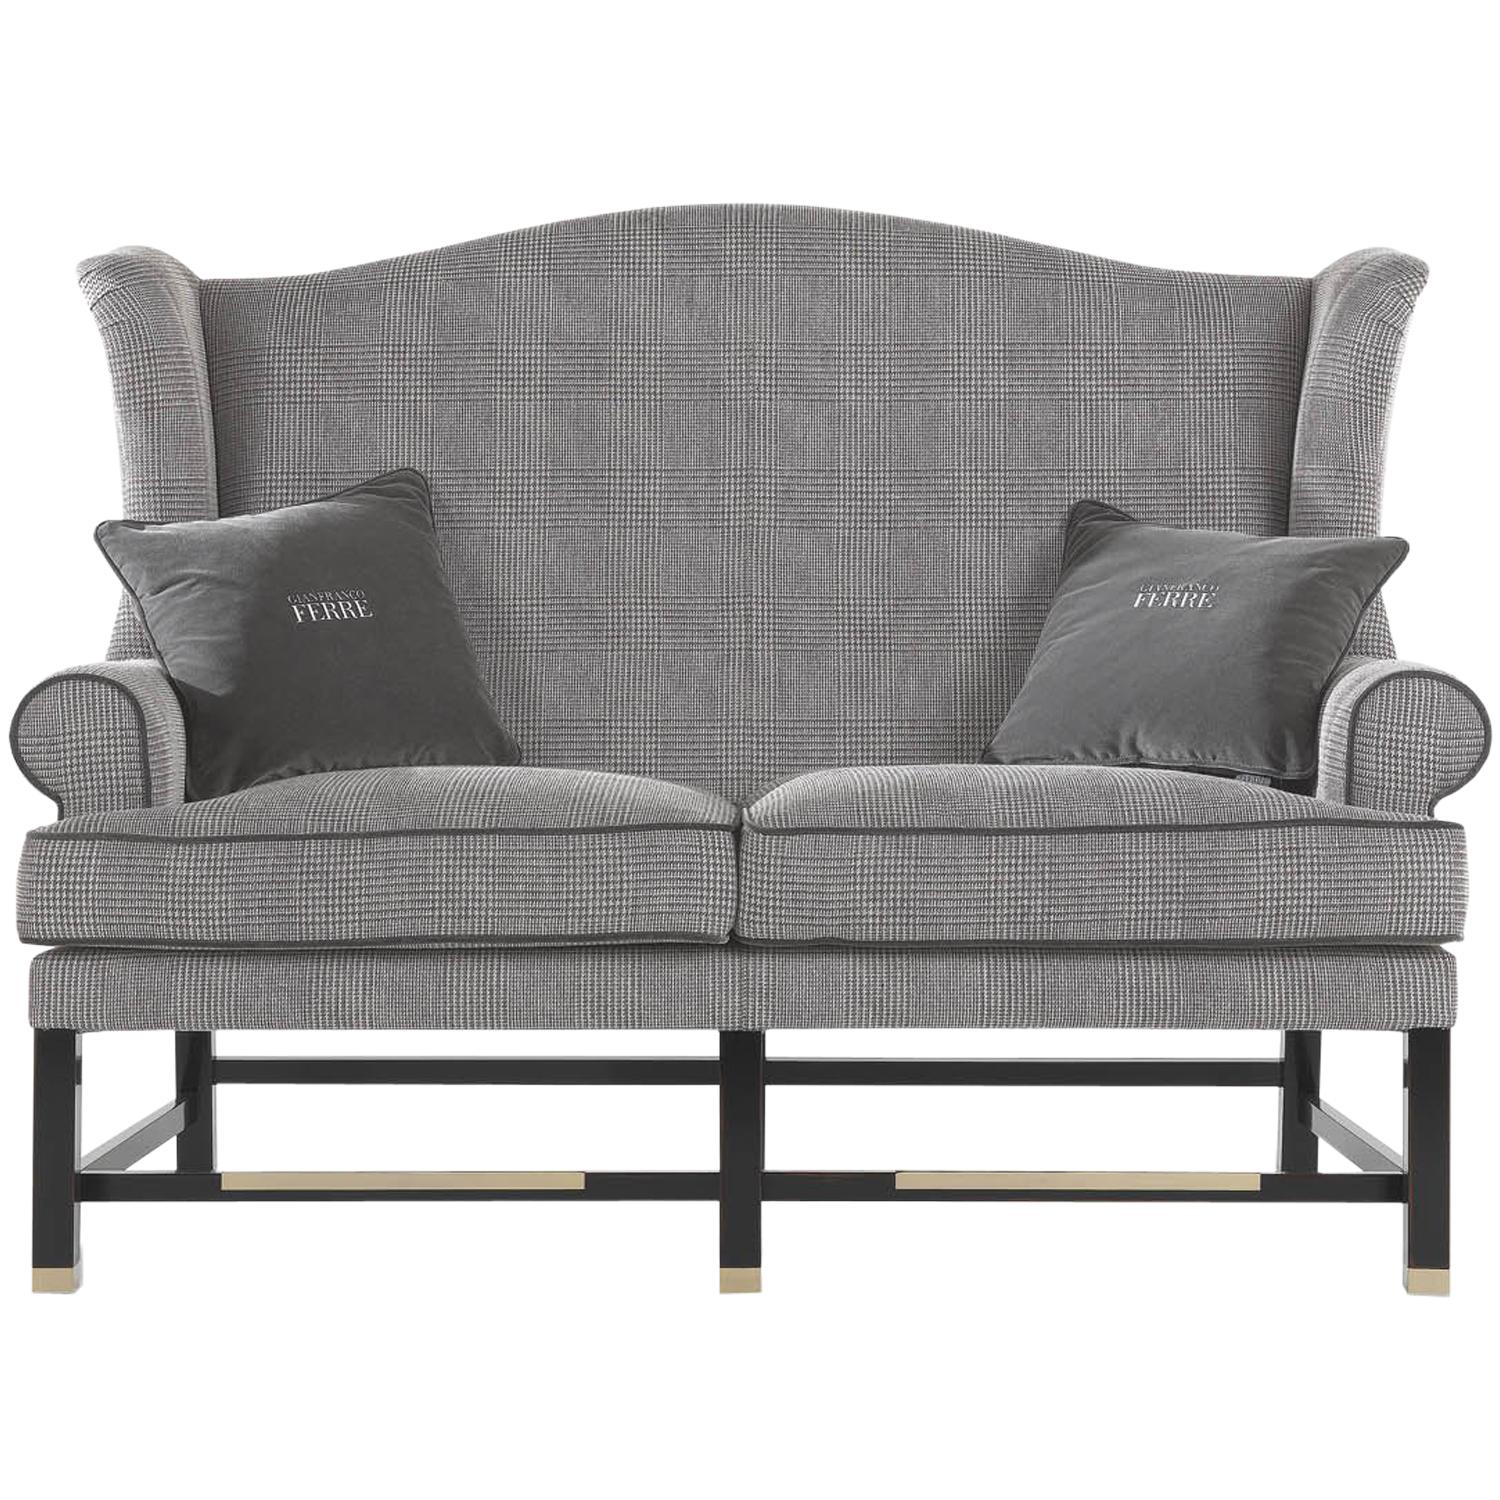 Gianfranco Ferre Ayla Two-Seat Sofa in Grey Fabric For Sale